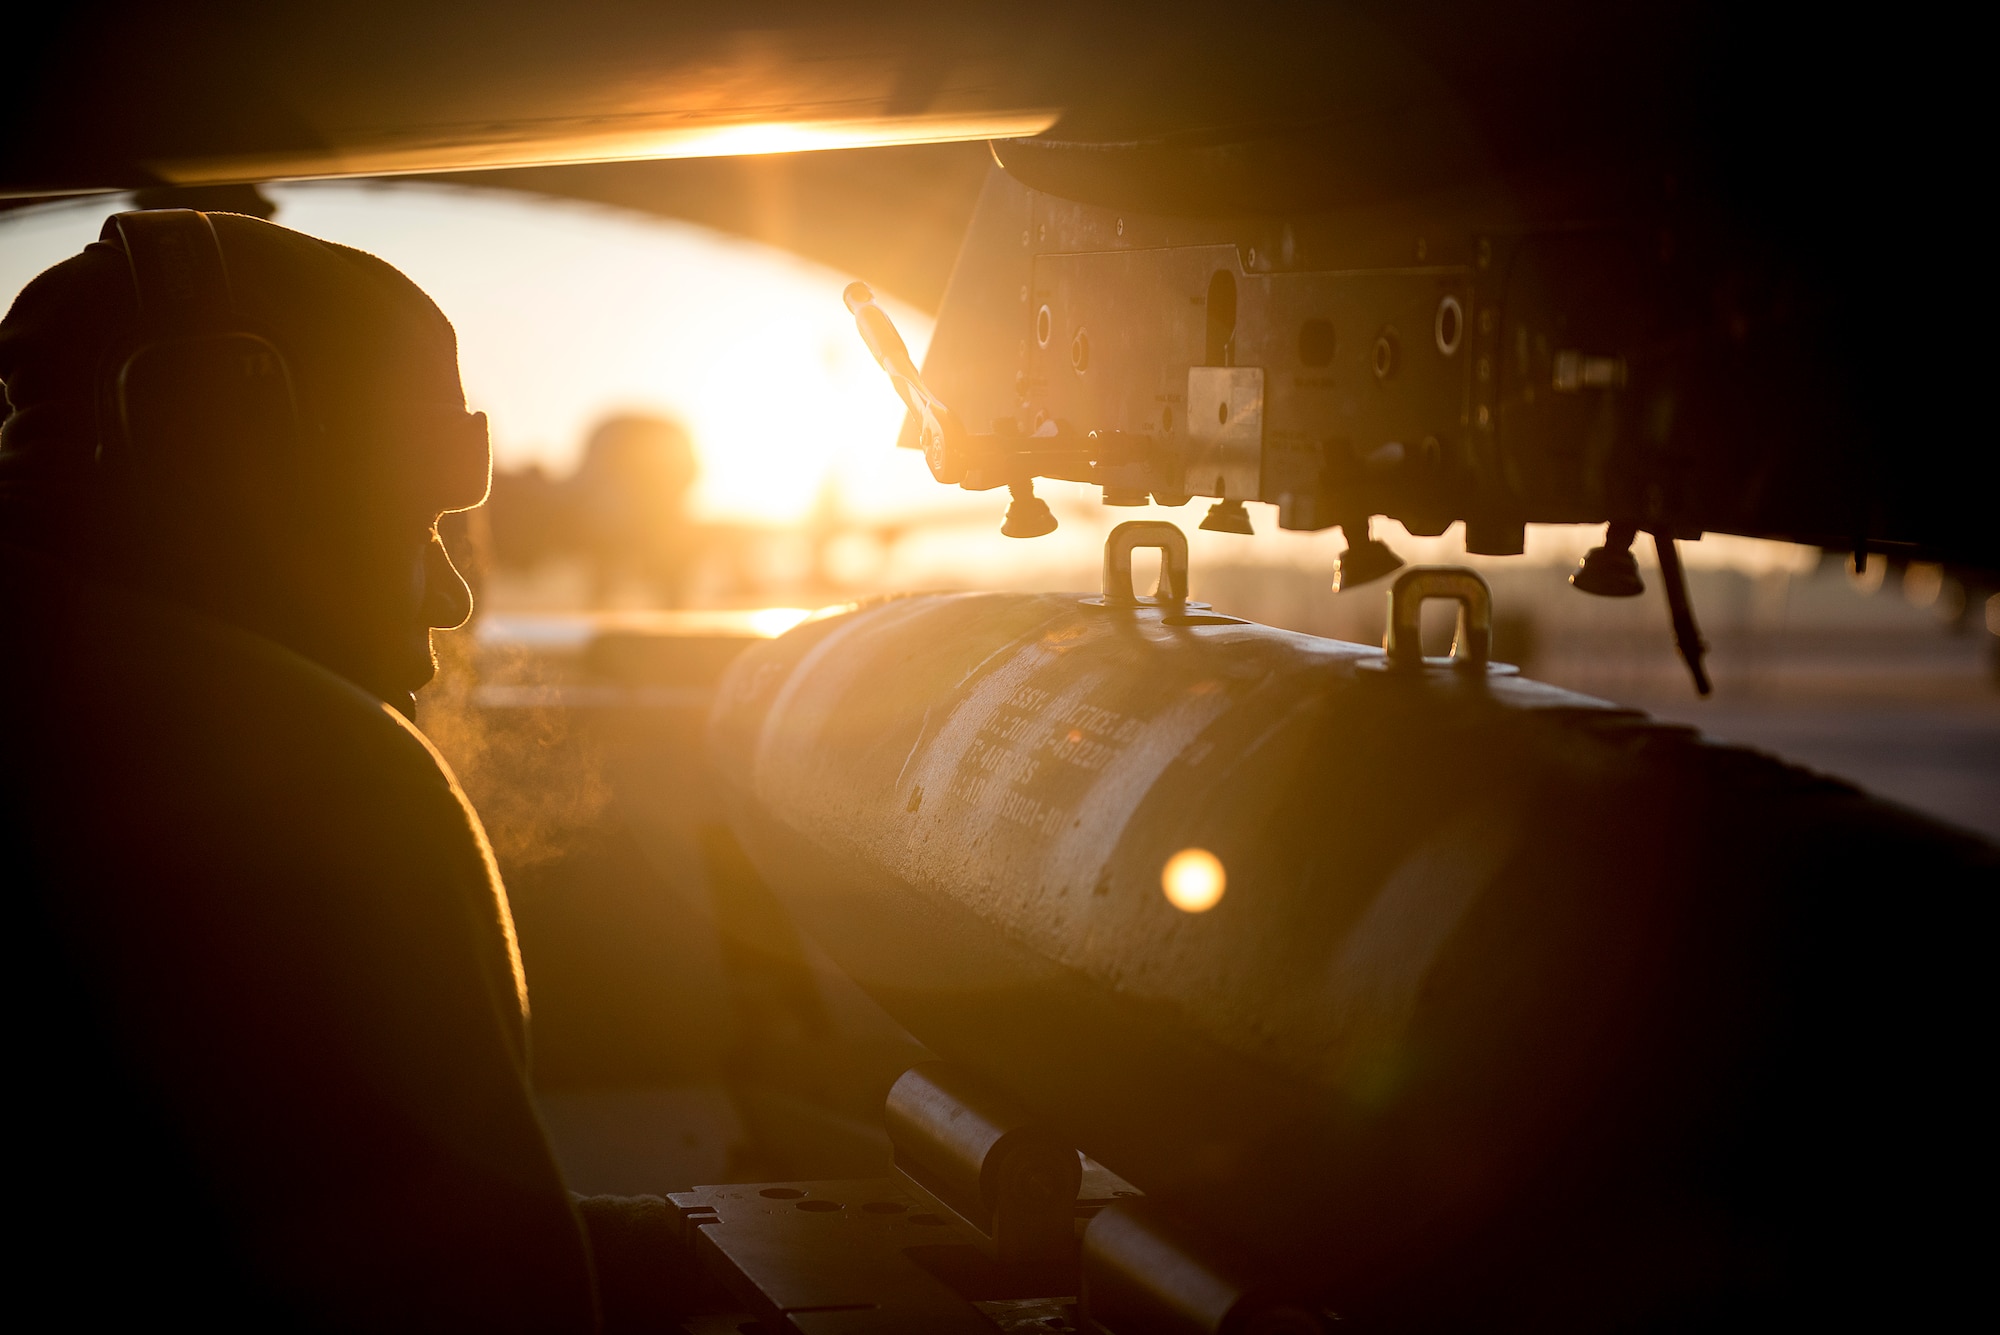 A U.S. Air Force weapons advisor loads a training bomb on an A-29 Super Tucano during the cold early morning hours at Moody Air Force Base, Georgia. (U.S. Air Force photo/Master Sgt. Jeffrey Allen)